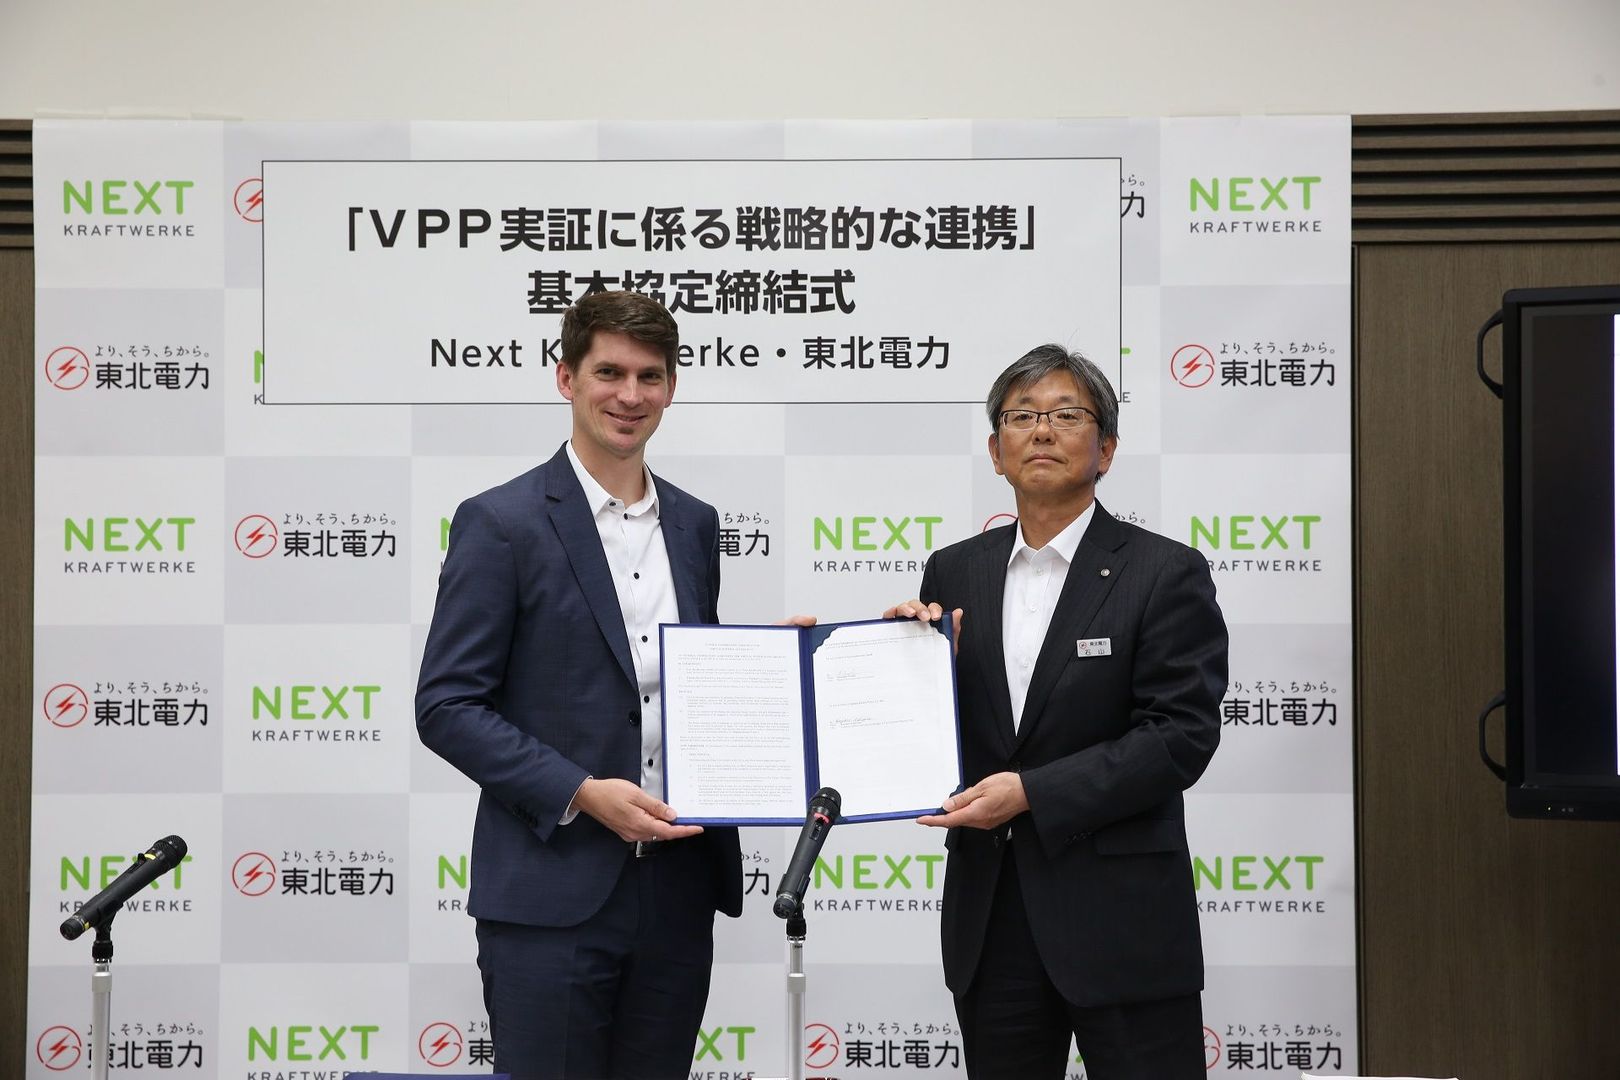 At the signing ceremony: Alexander Krautz, Head of Innovation & Development at Next Kraftwerke, and Kazuhiro Ishiyama, Executive Officer and General Manager of the Corporate Planning Department at Tohoku EPCO.